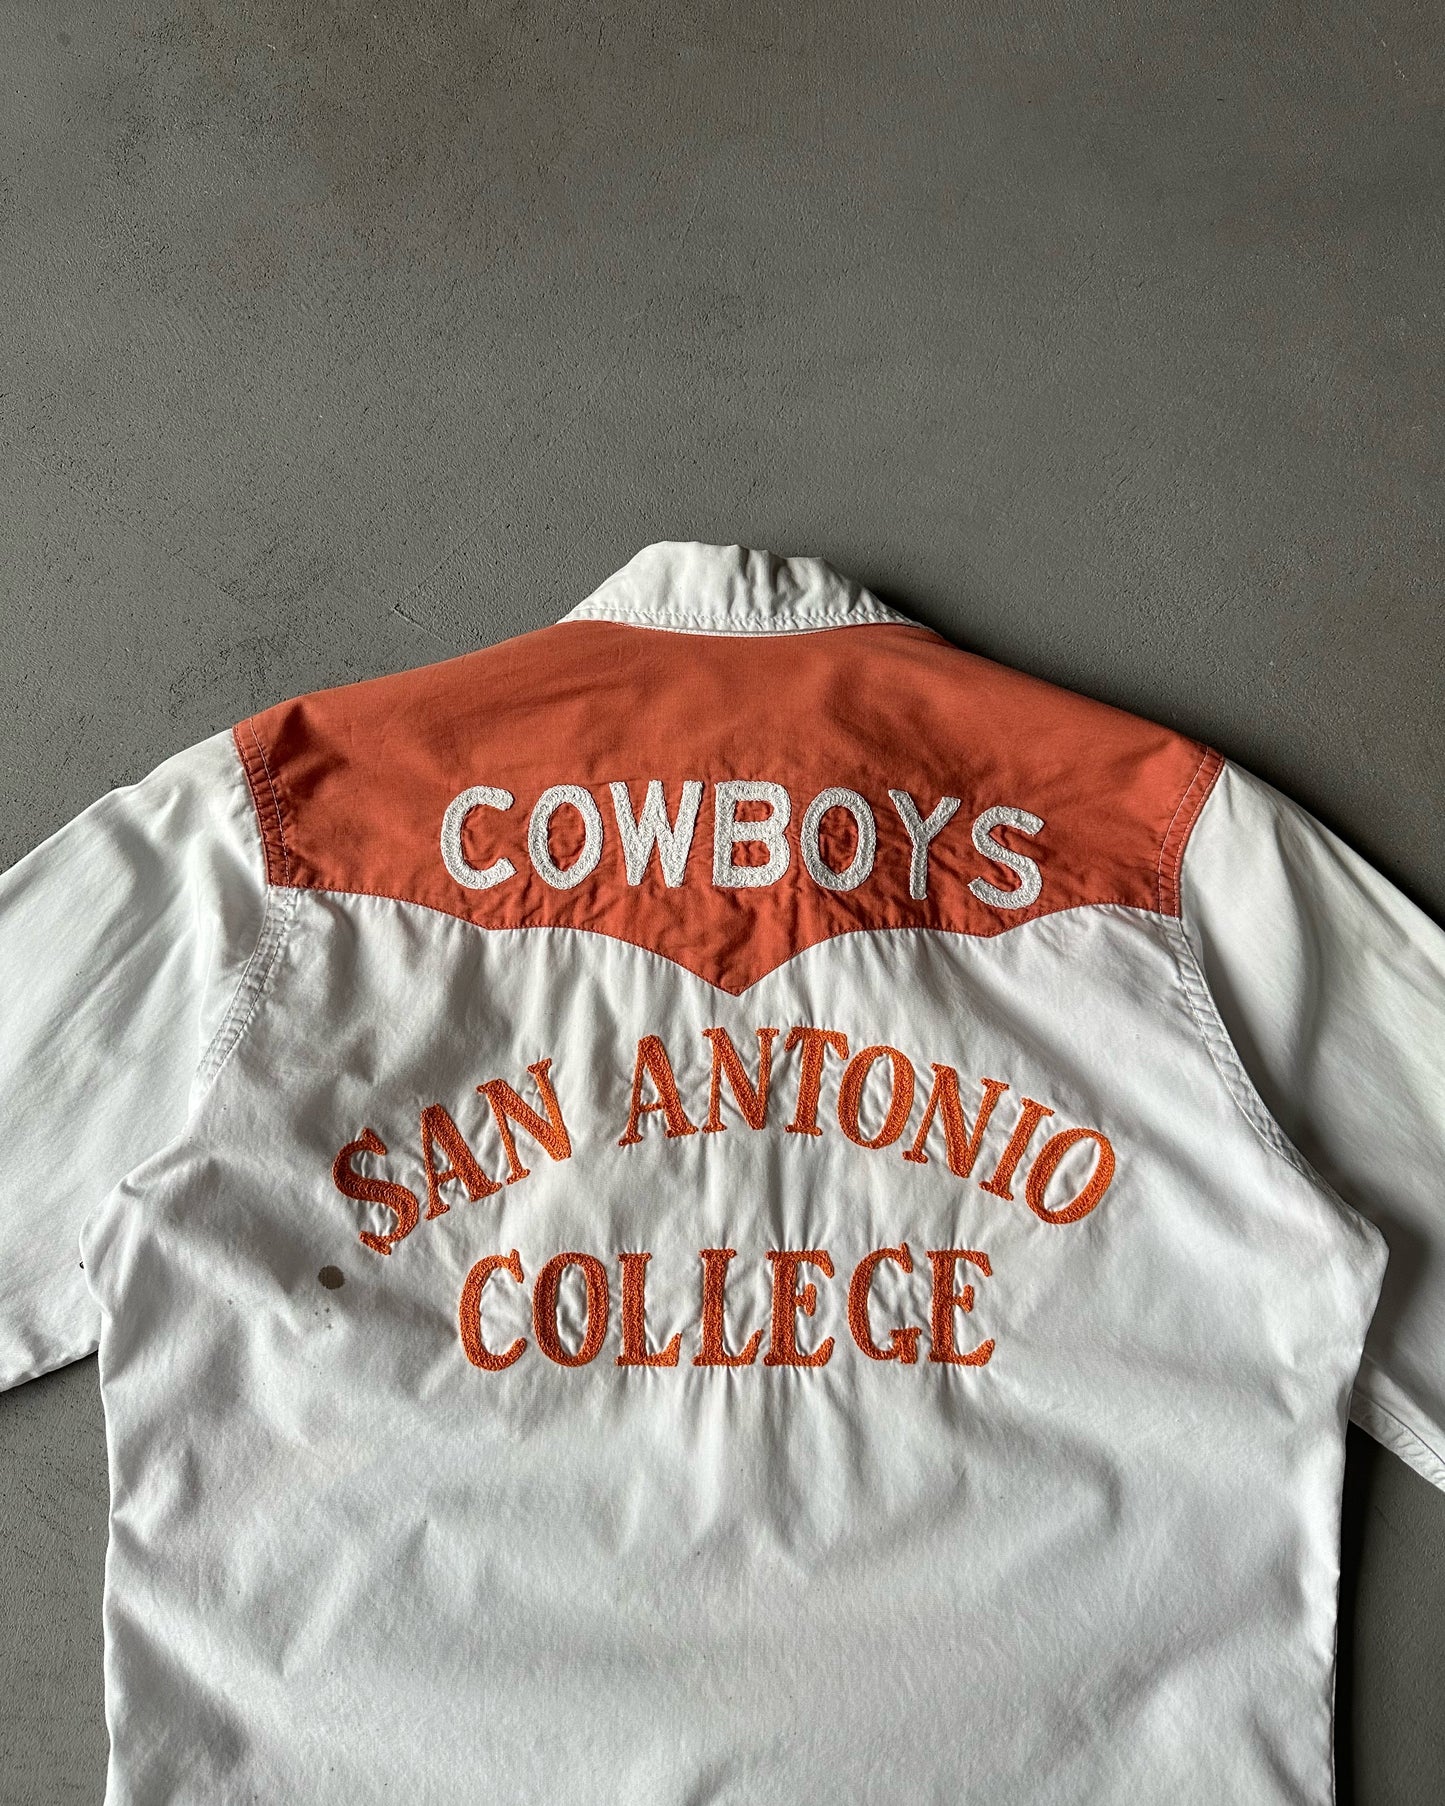 1960s - White/Coral "Cowboys" Chainstitch Pearl Snap Shirt - XS(Long)